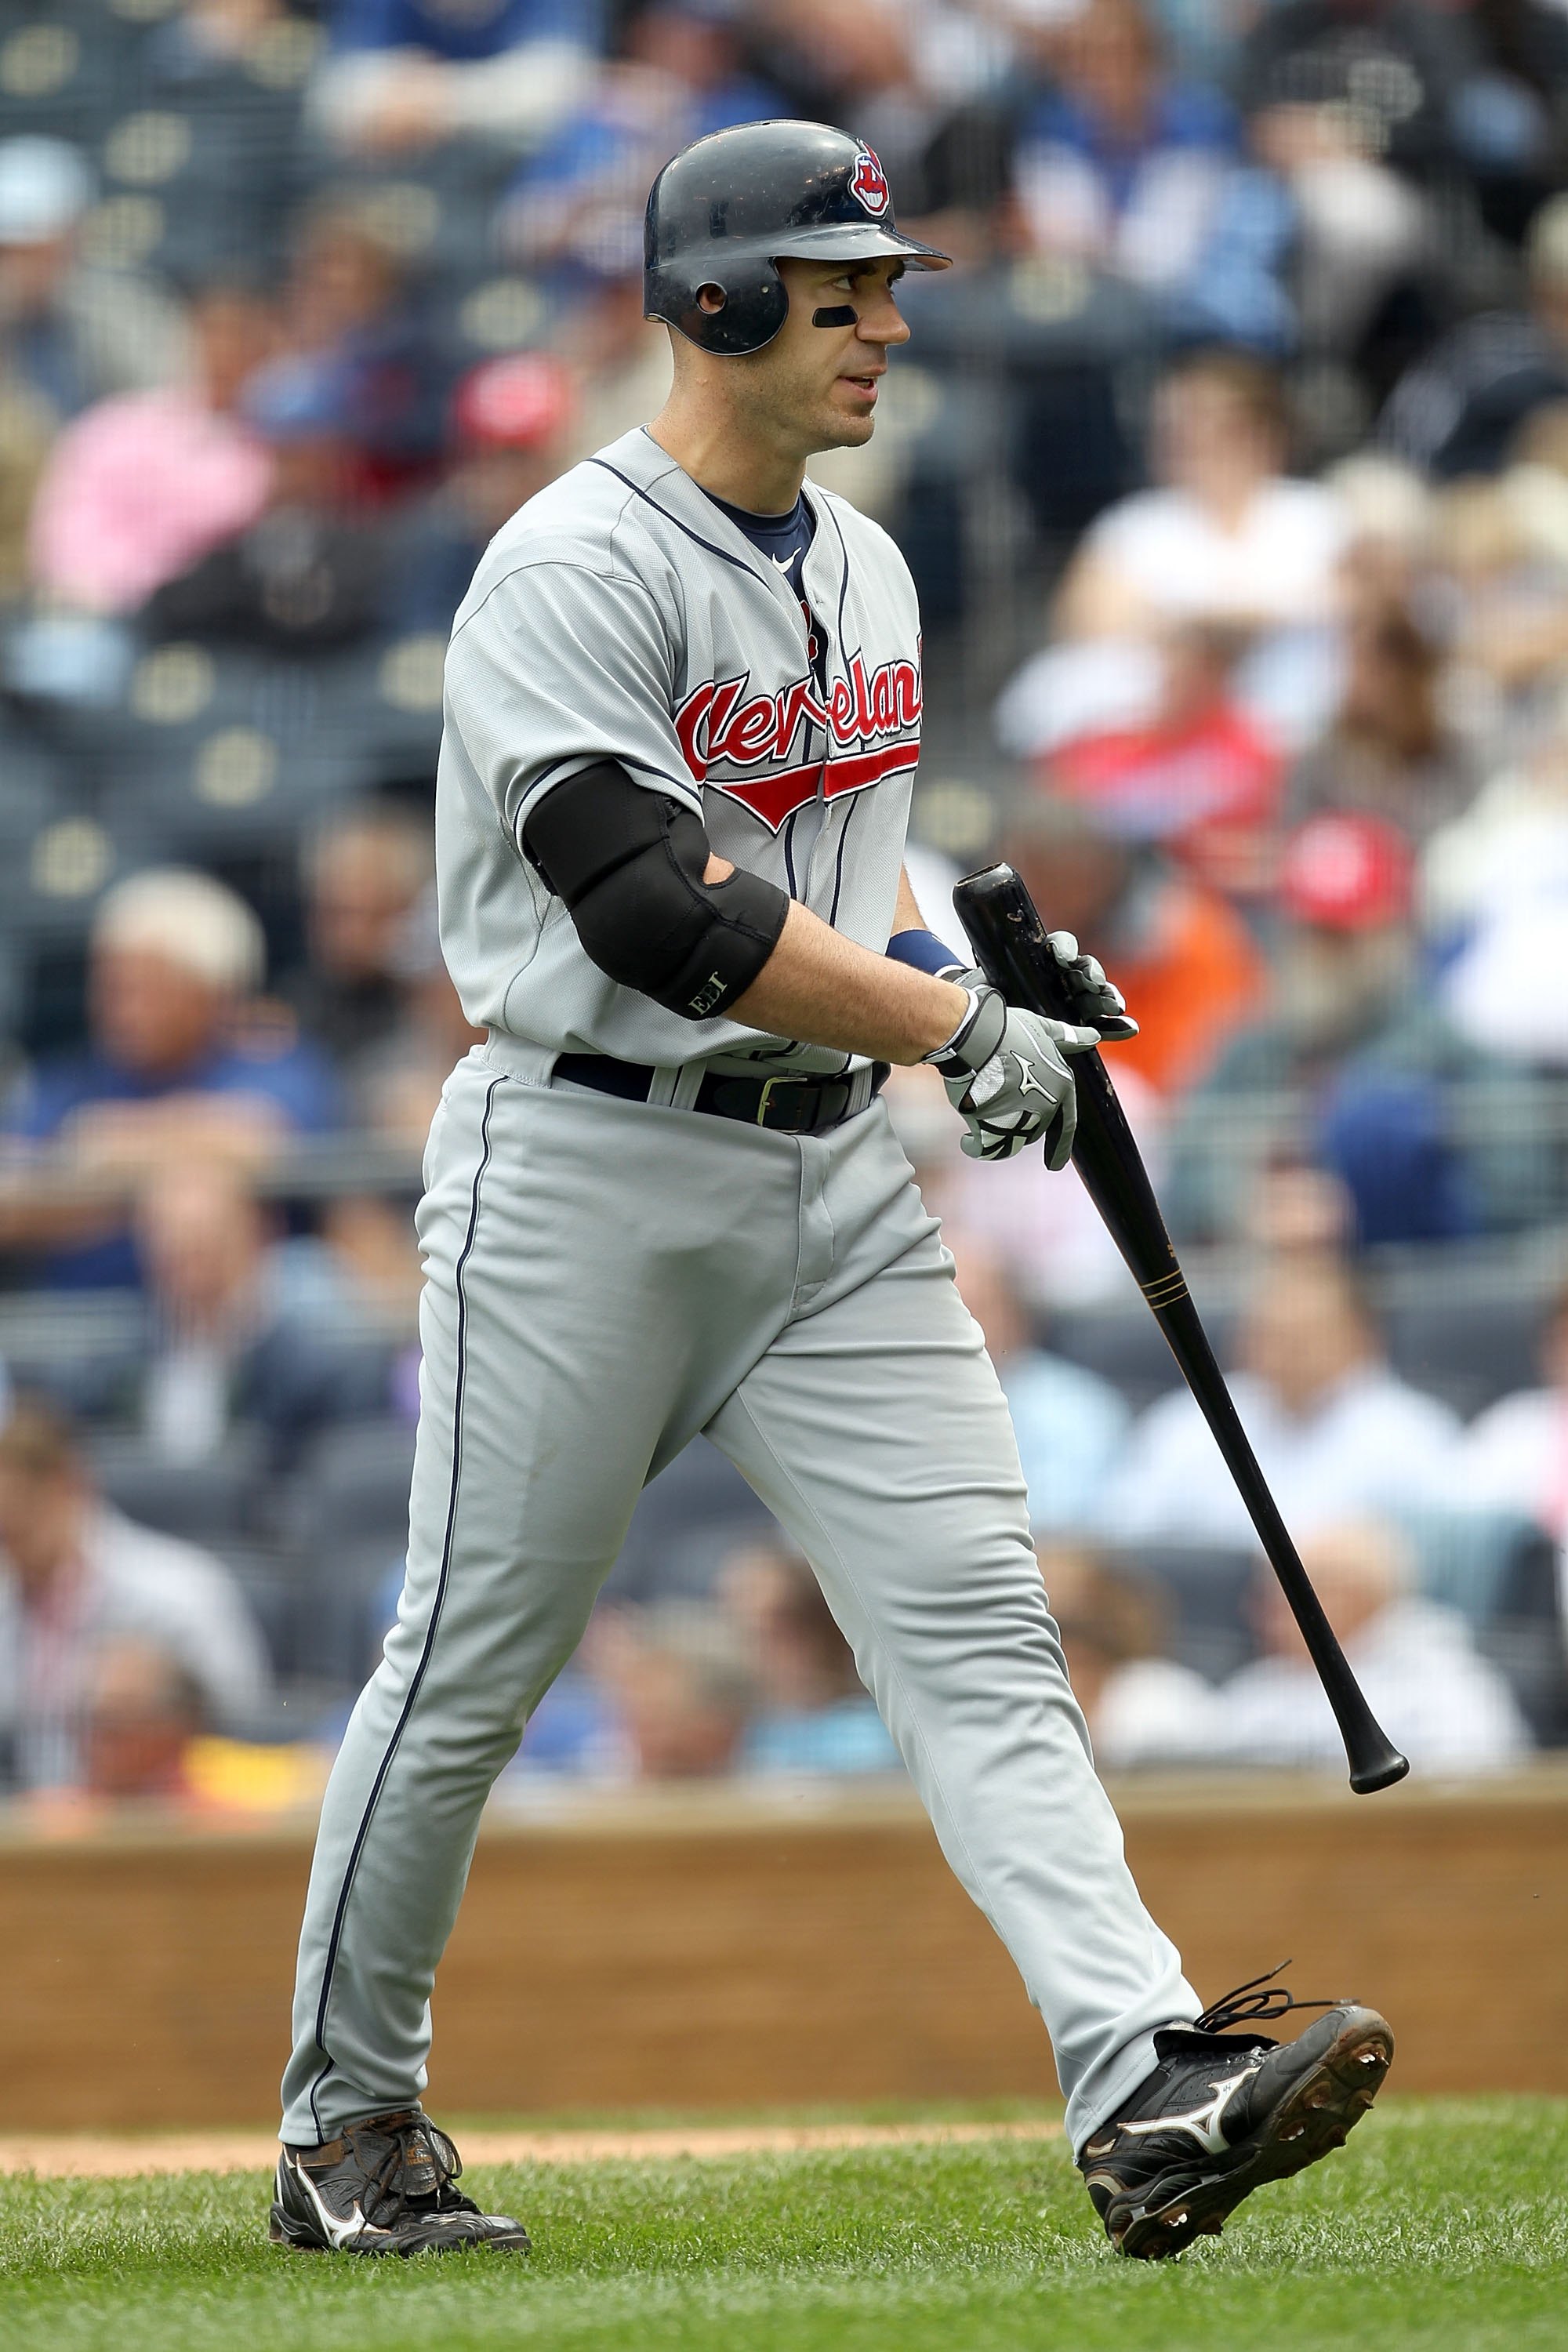 KANSAS CITY, MO - MAY 13:  Travis Hafner #48 of the Cleveland Indians walks back to the dugout after striking out during the game against the Kansas City Royals on May 13, 2010 at Kauffman Stadium in Kansas City, Missouri.  (Photo by Jamie Squire/Getty Im